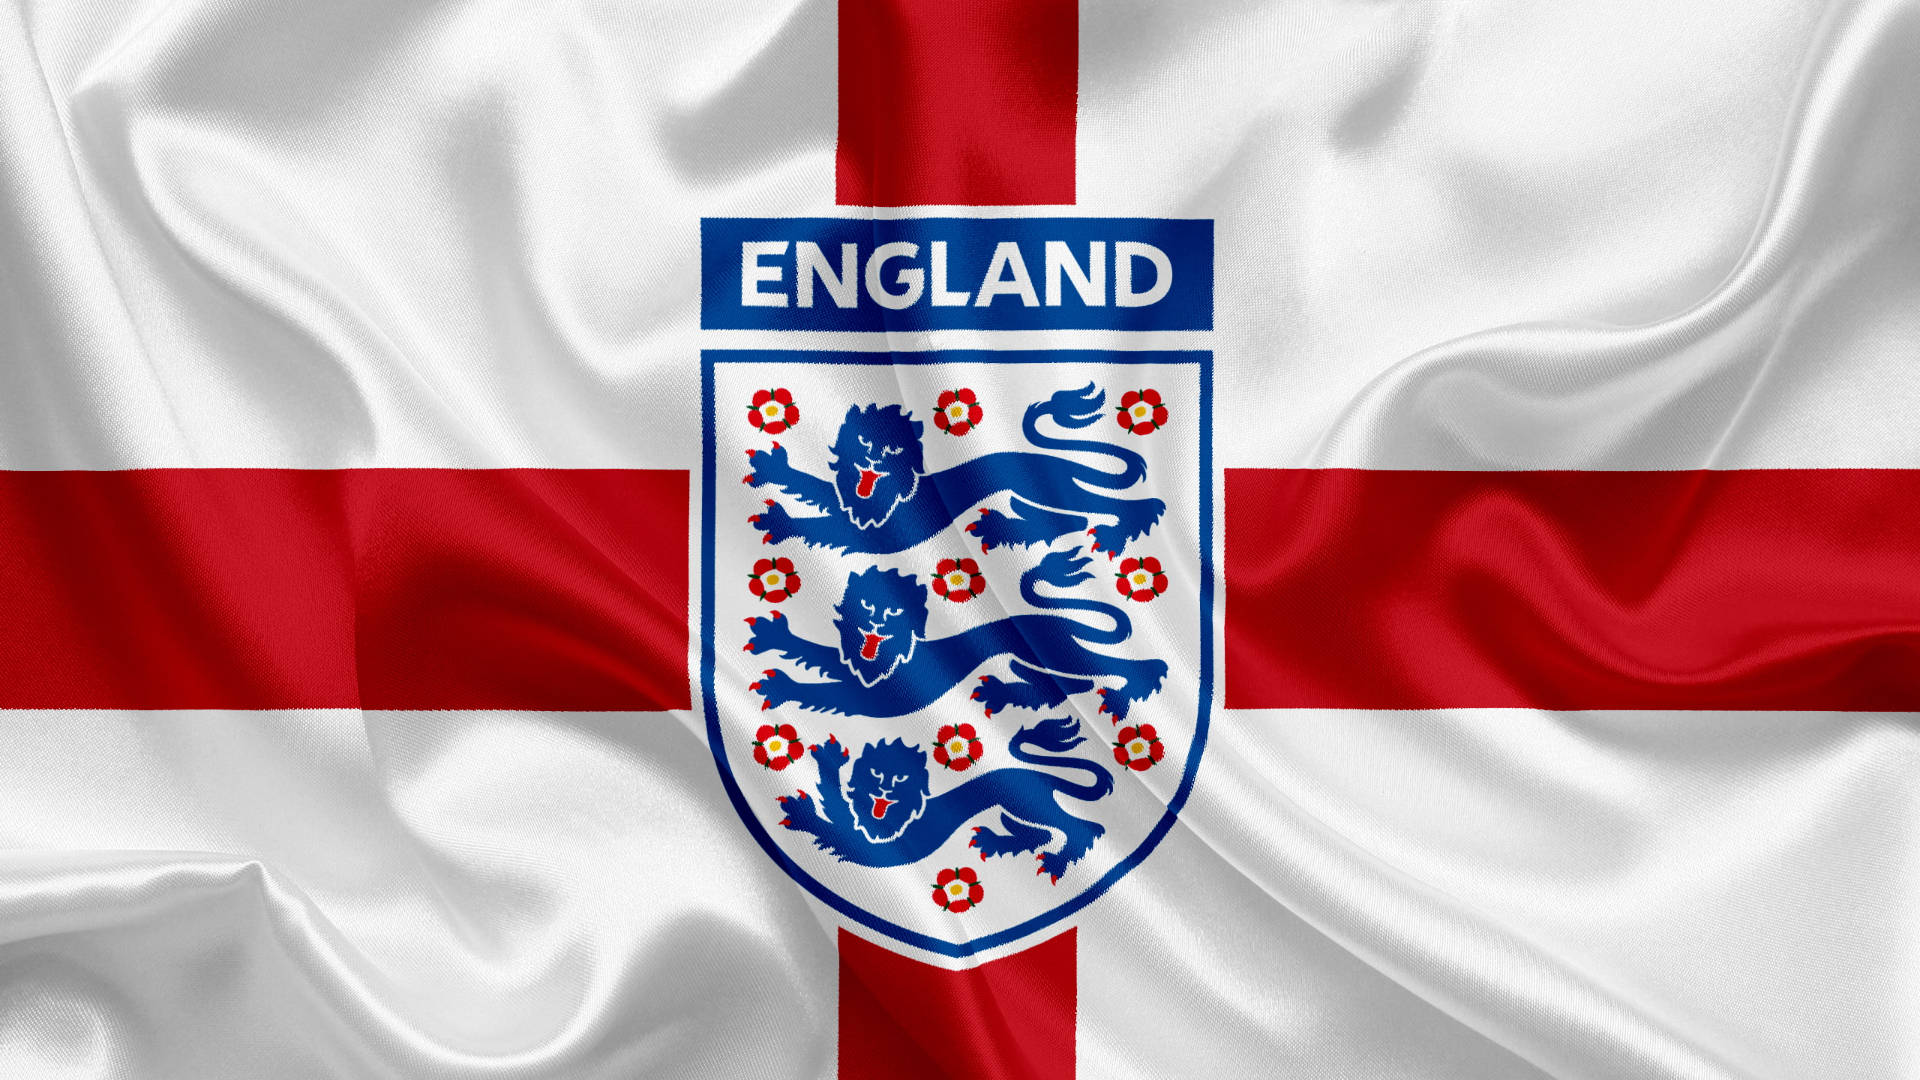 England Football Pictures Wallpaper